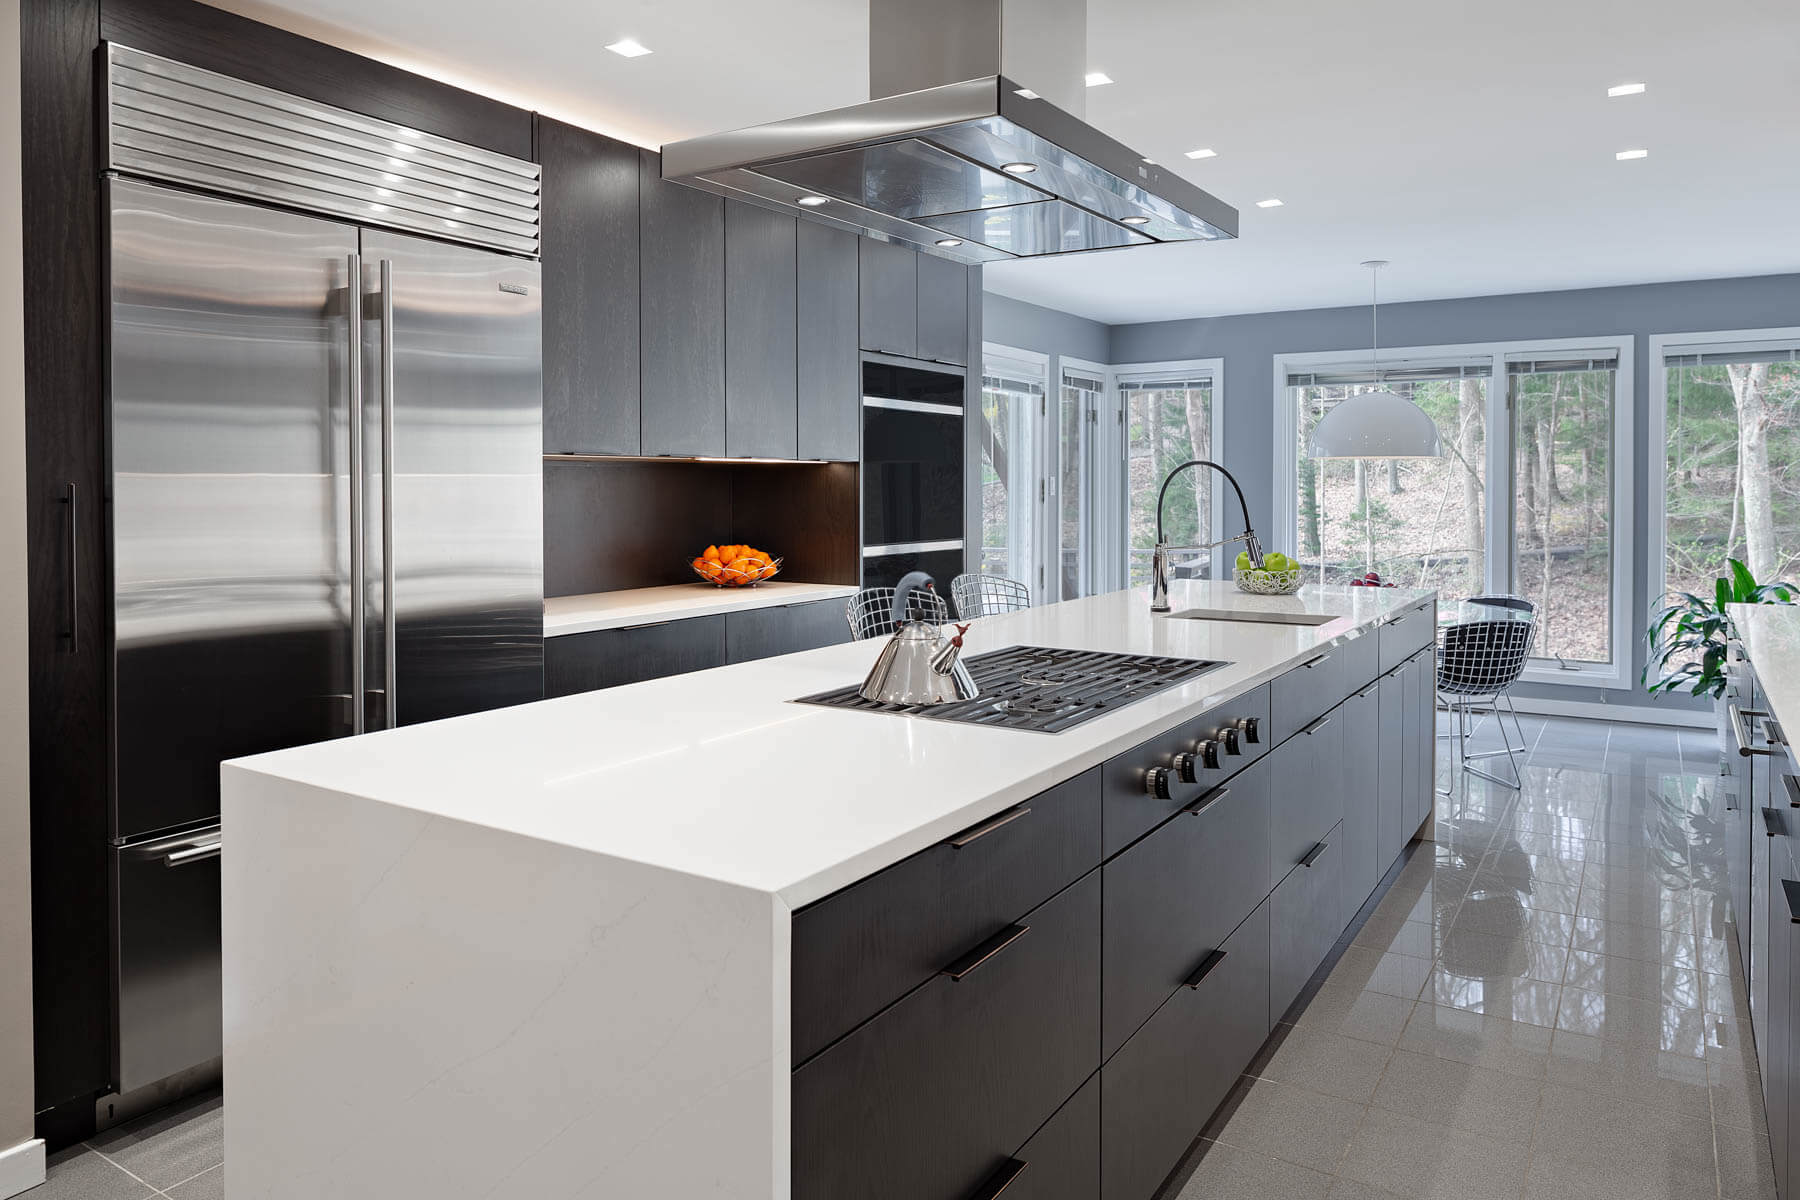 Kitchen and bath remodeling company in Highland Park